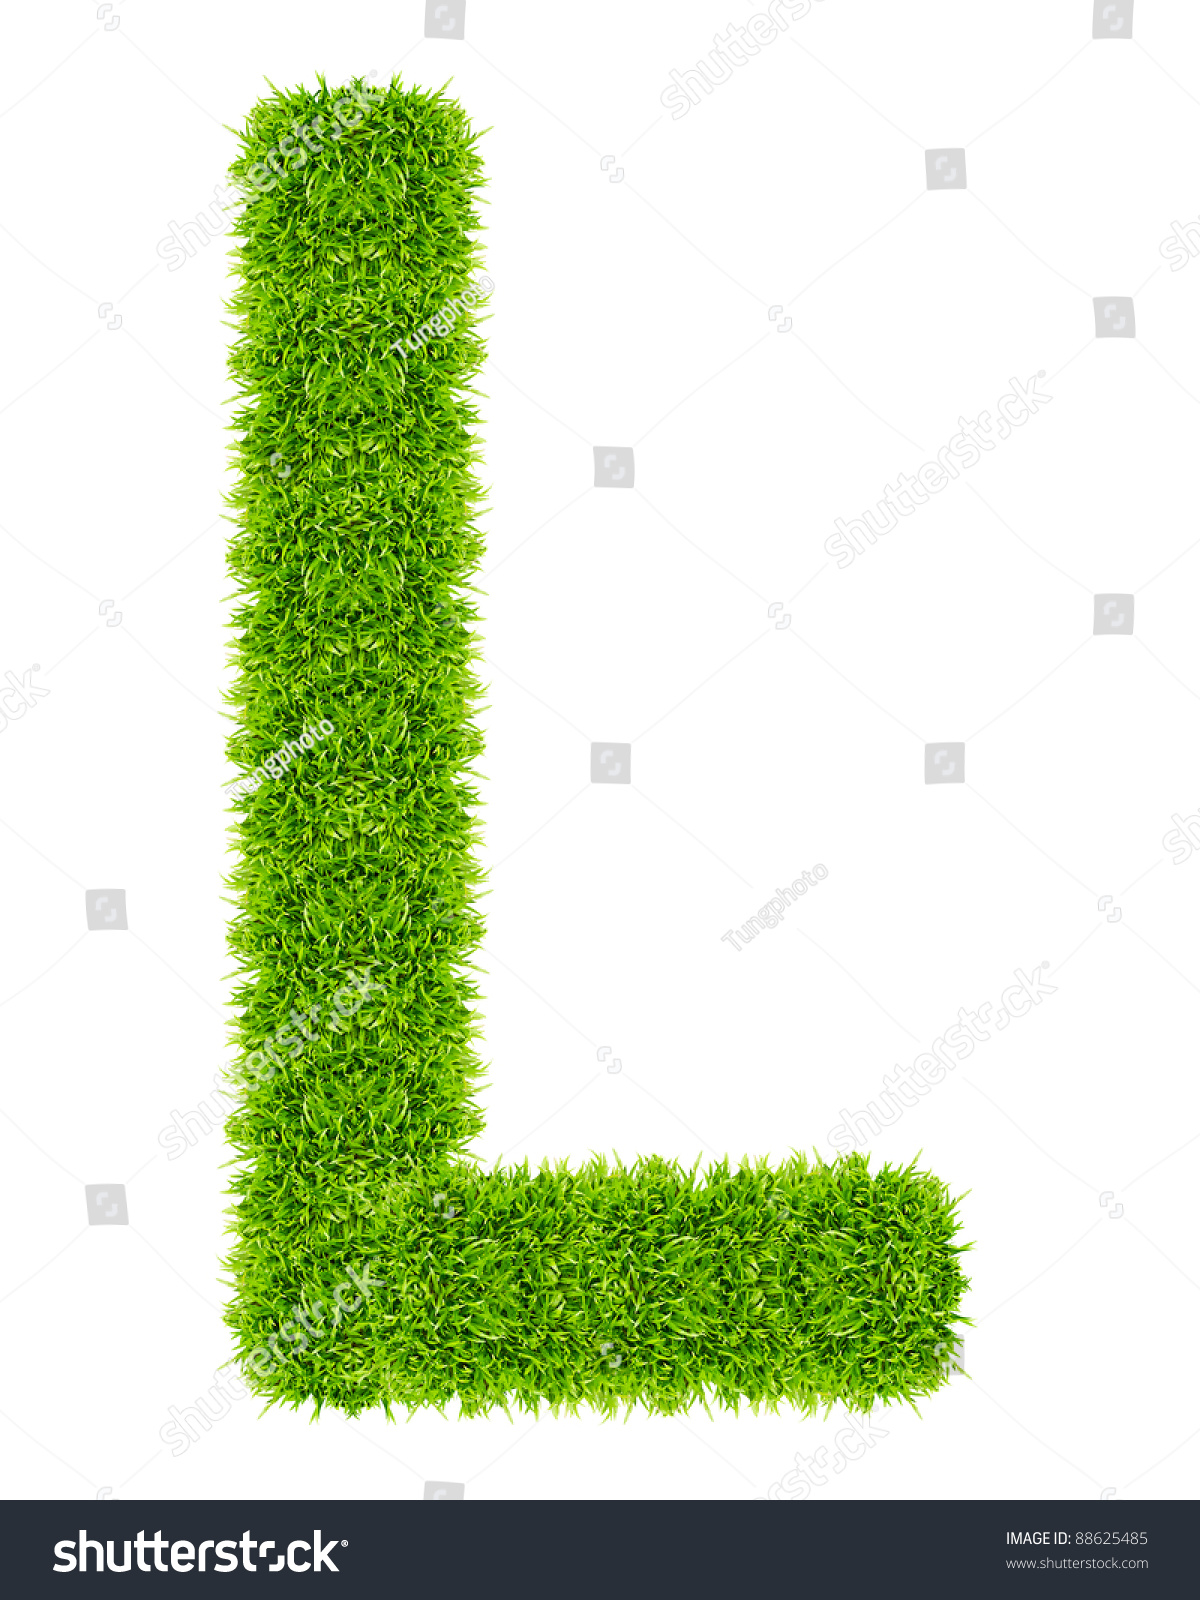 Green Grass Letter L Isolated Stock Photo 88625485 : Shutterstock